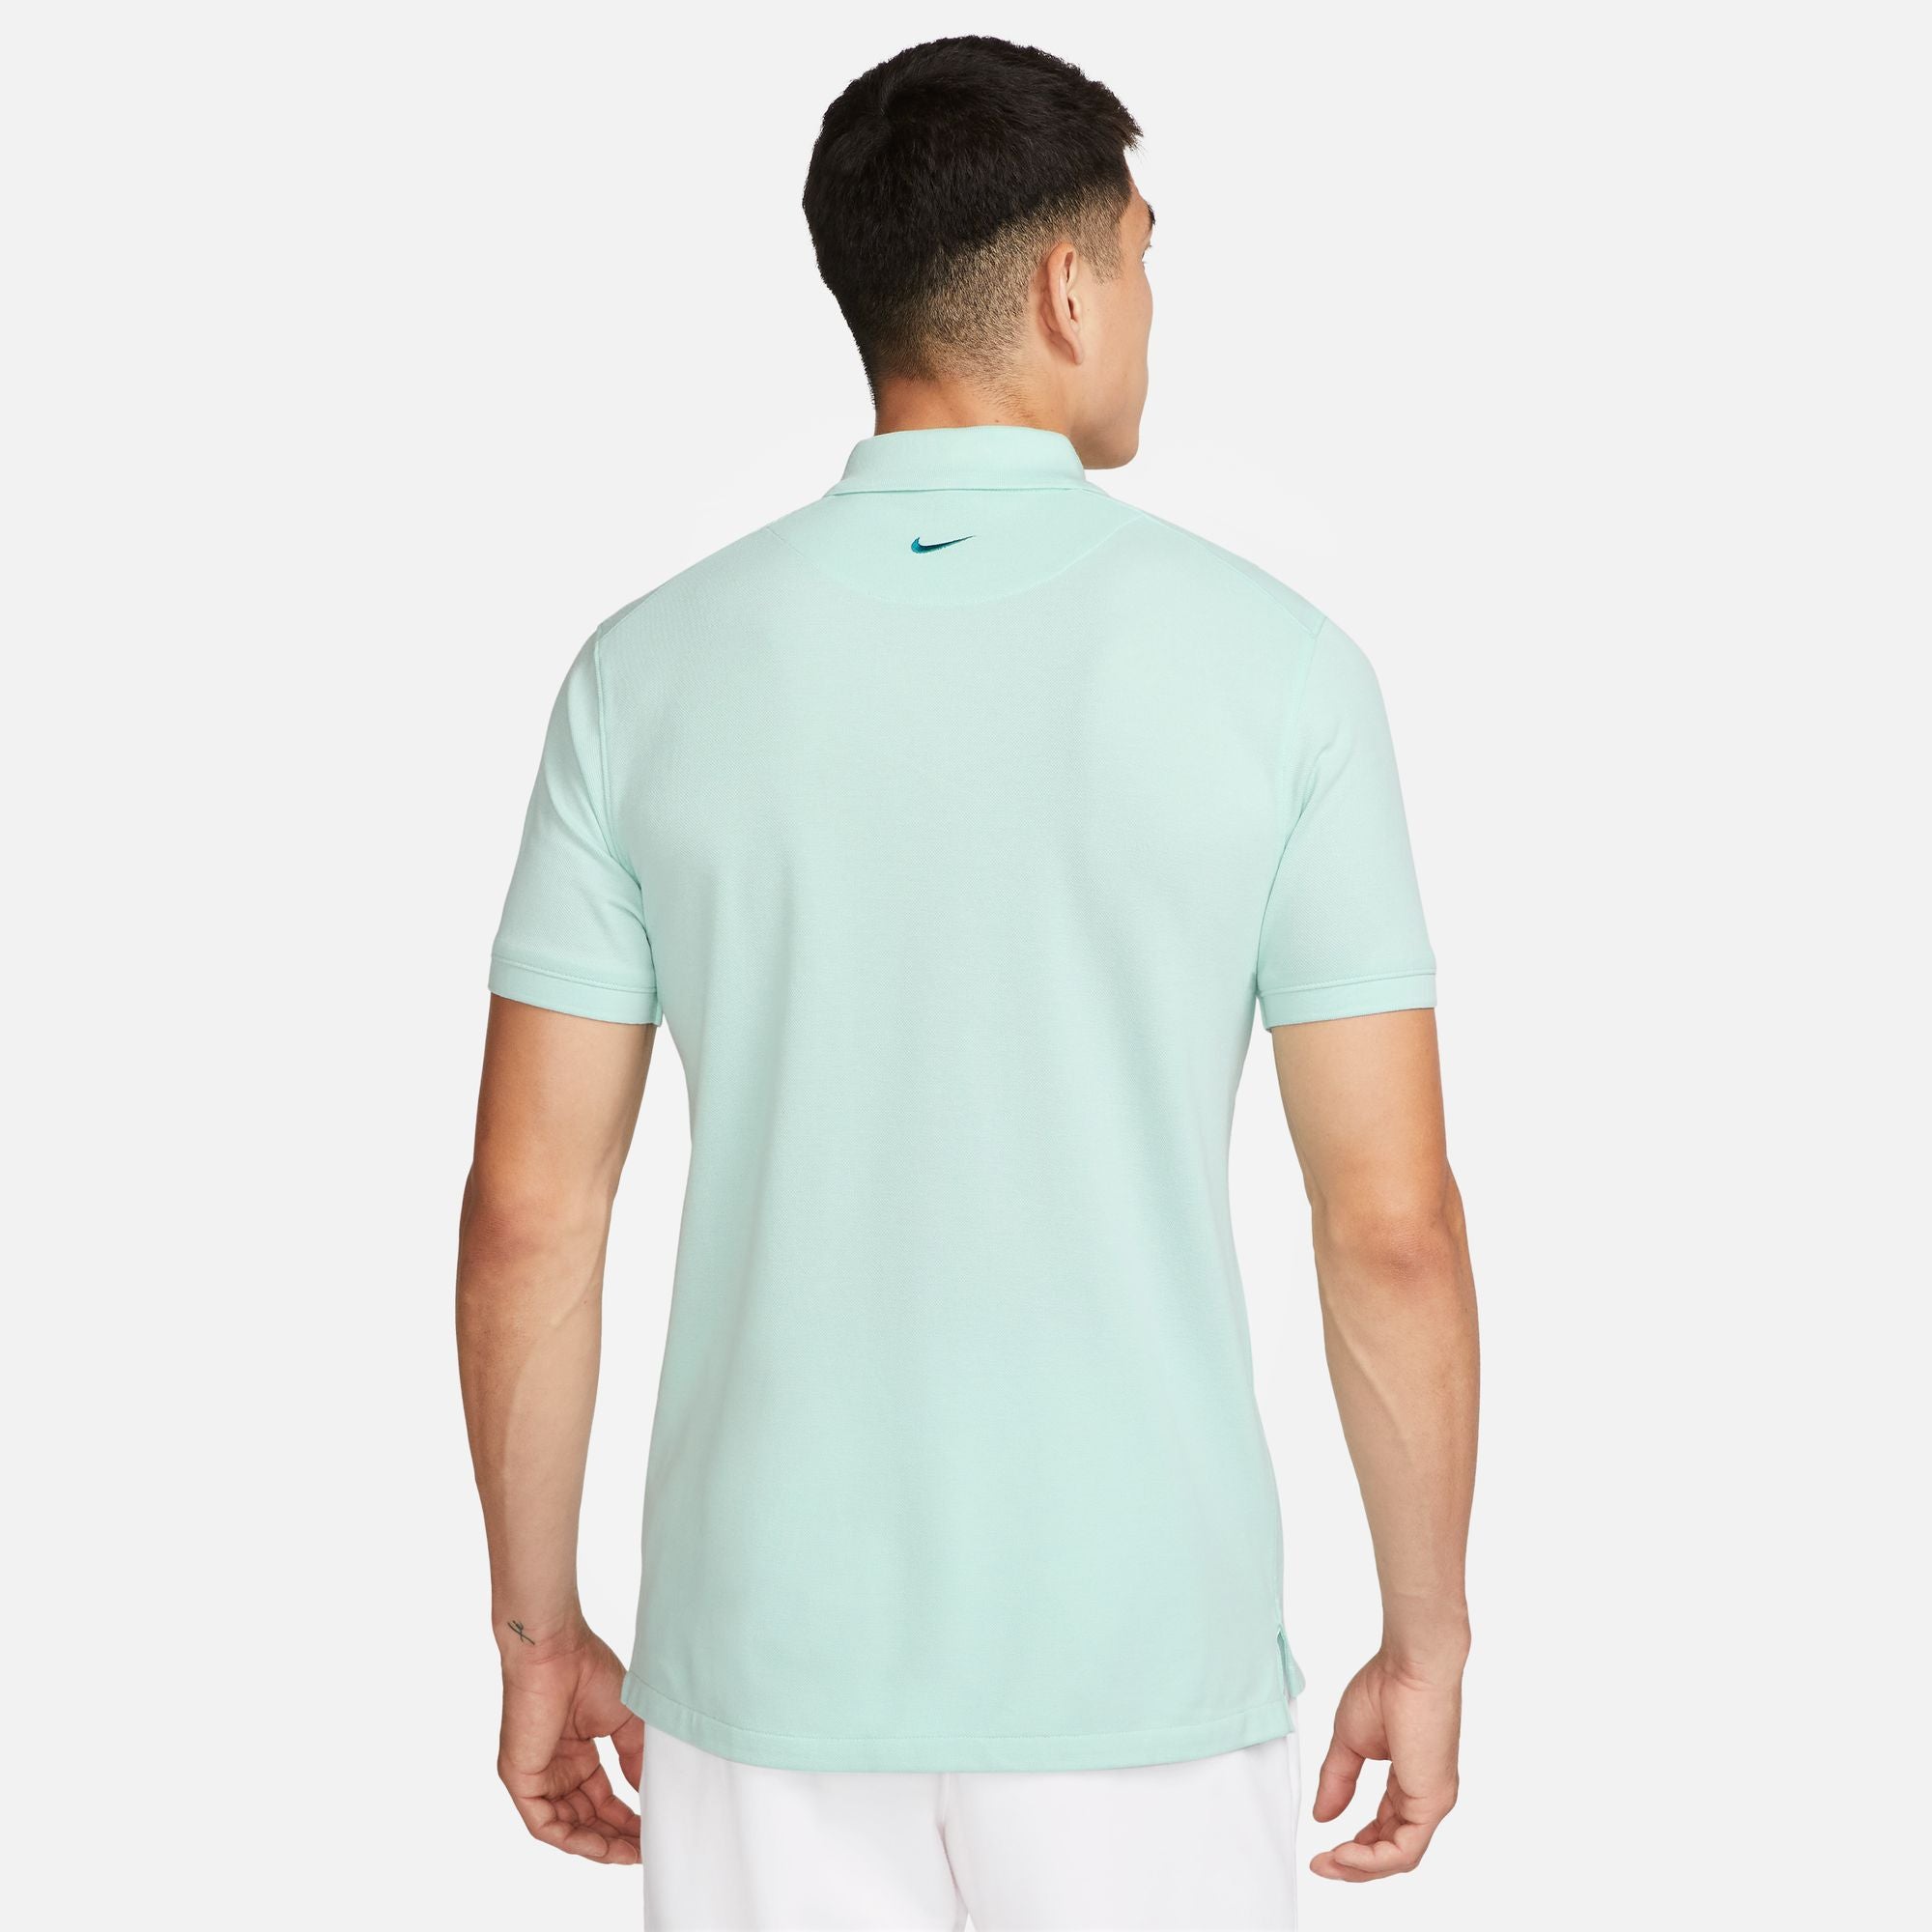 THE NIKE POLO MEN'S SLIM FIT POLO